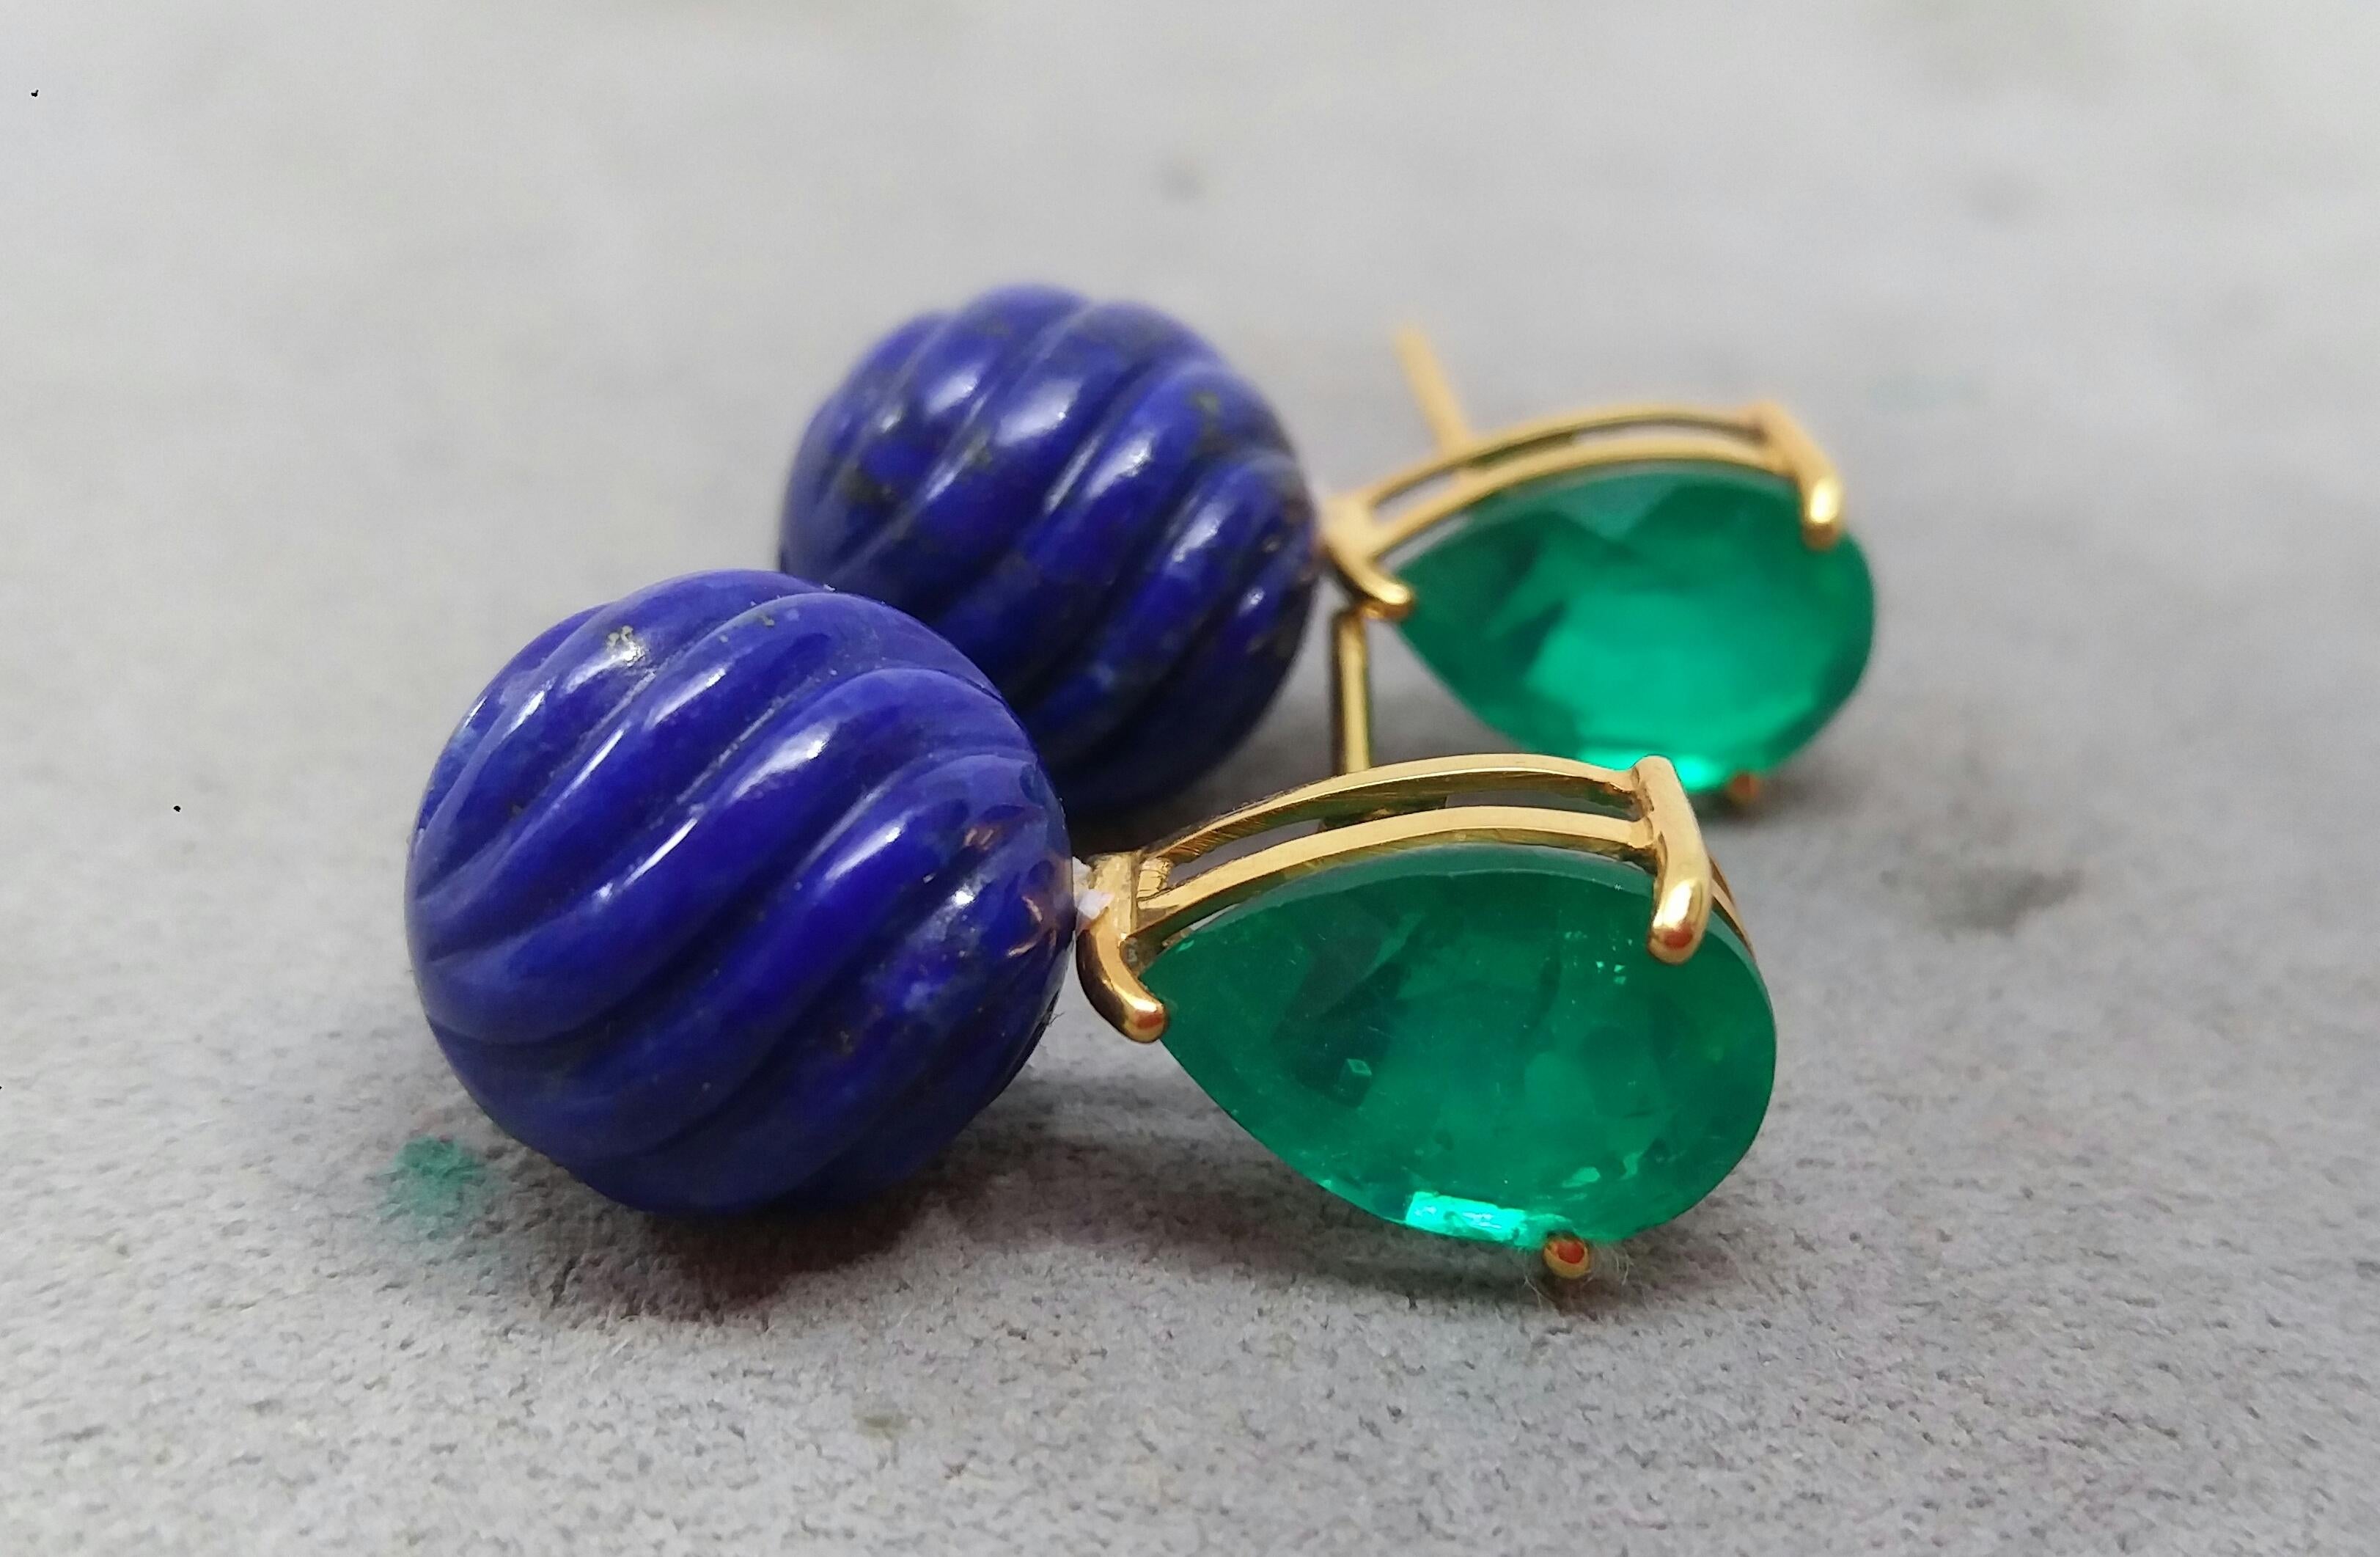 Pear Cut Carved Lapis Lazuli Round Beads Green Quartz 14 Karat Yellow Gold Earrings For Sale